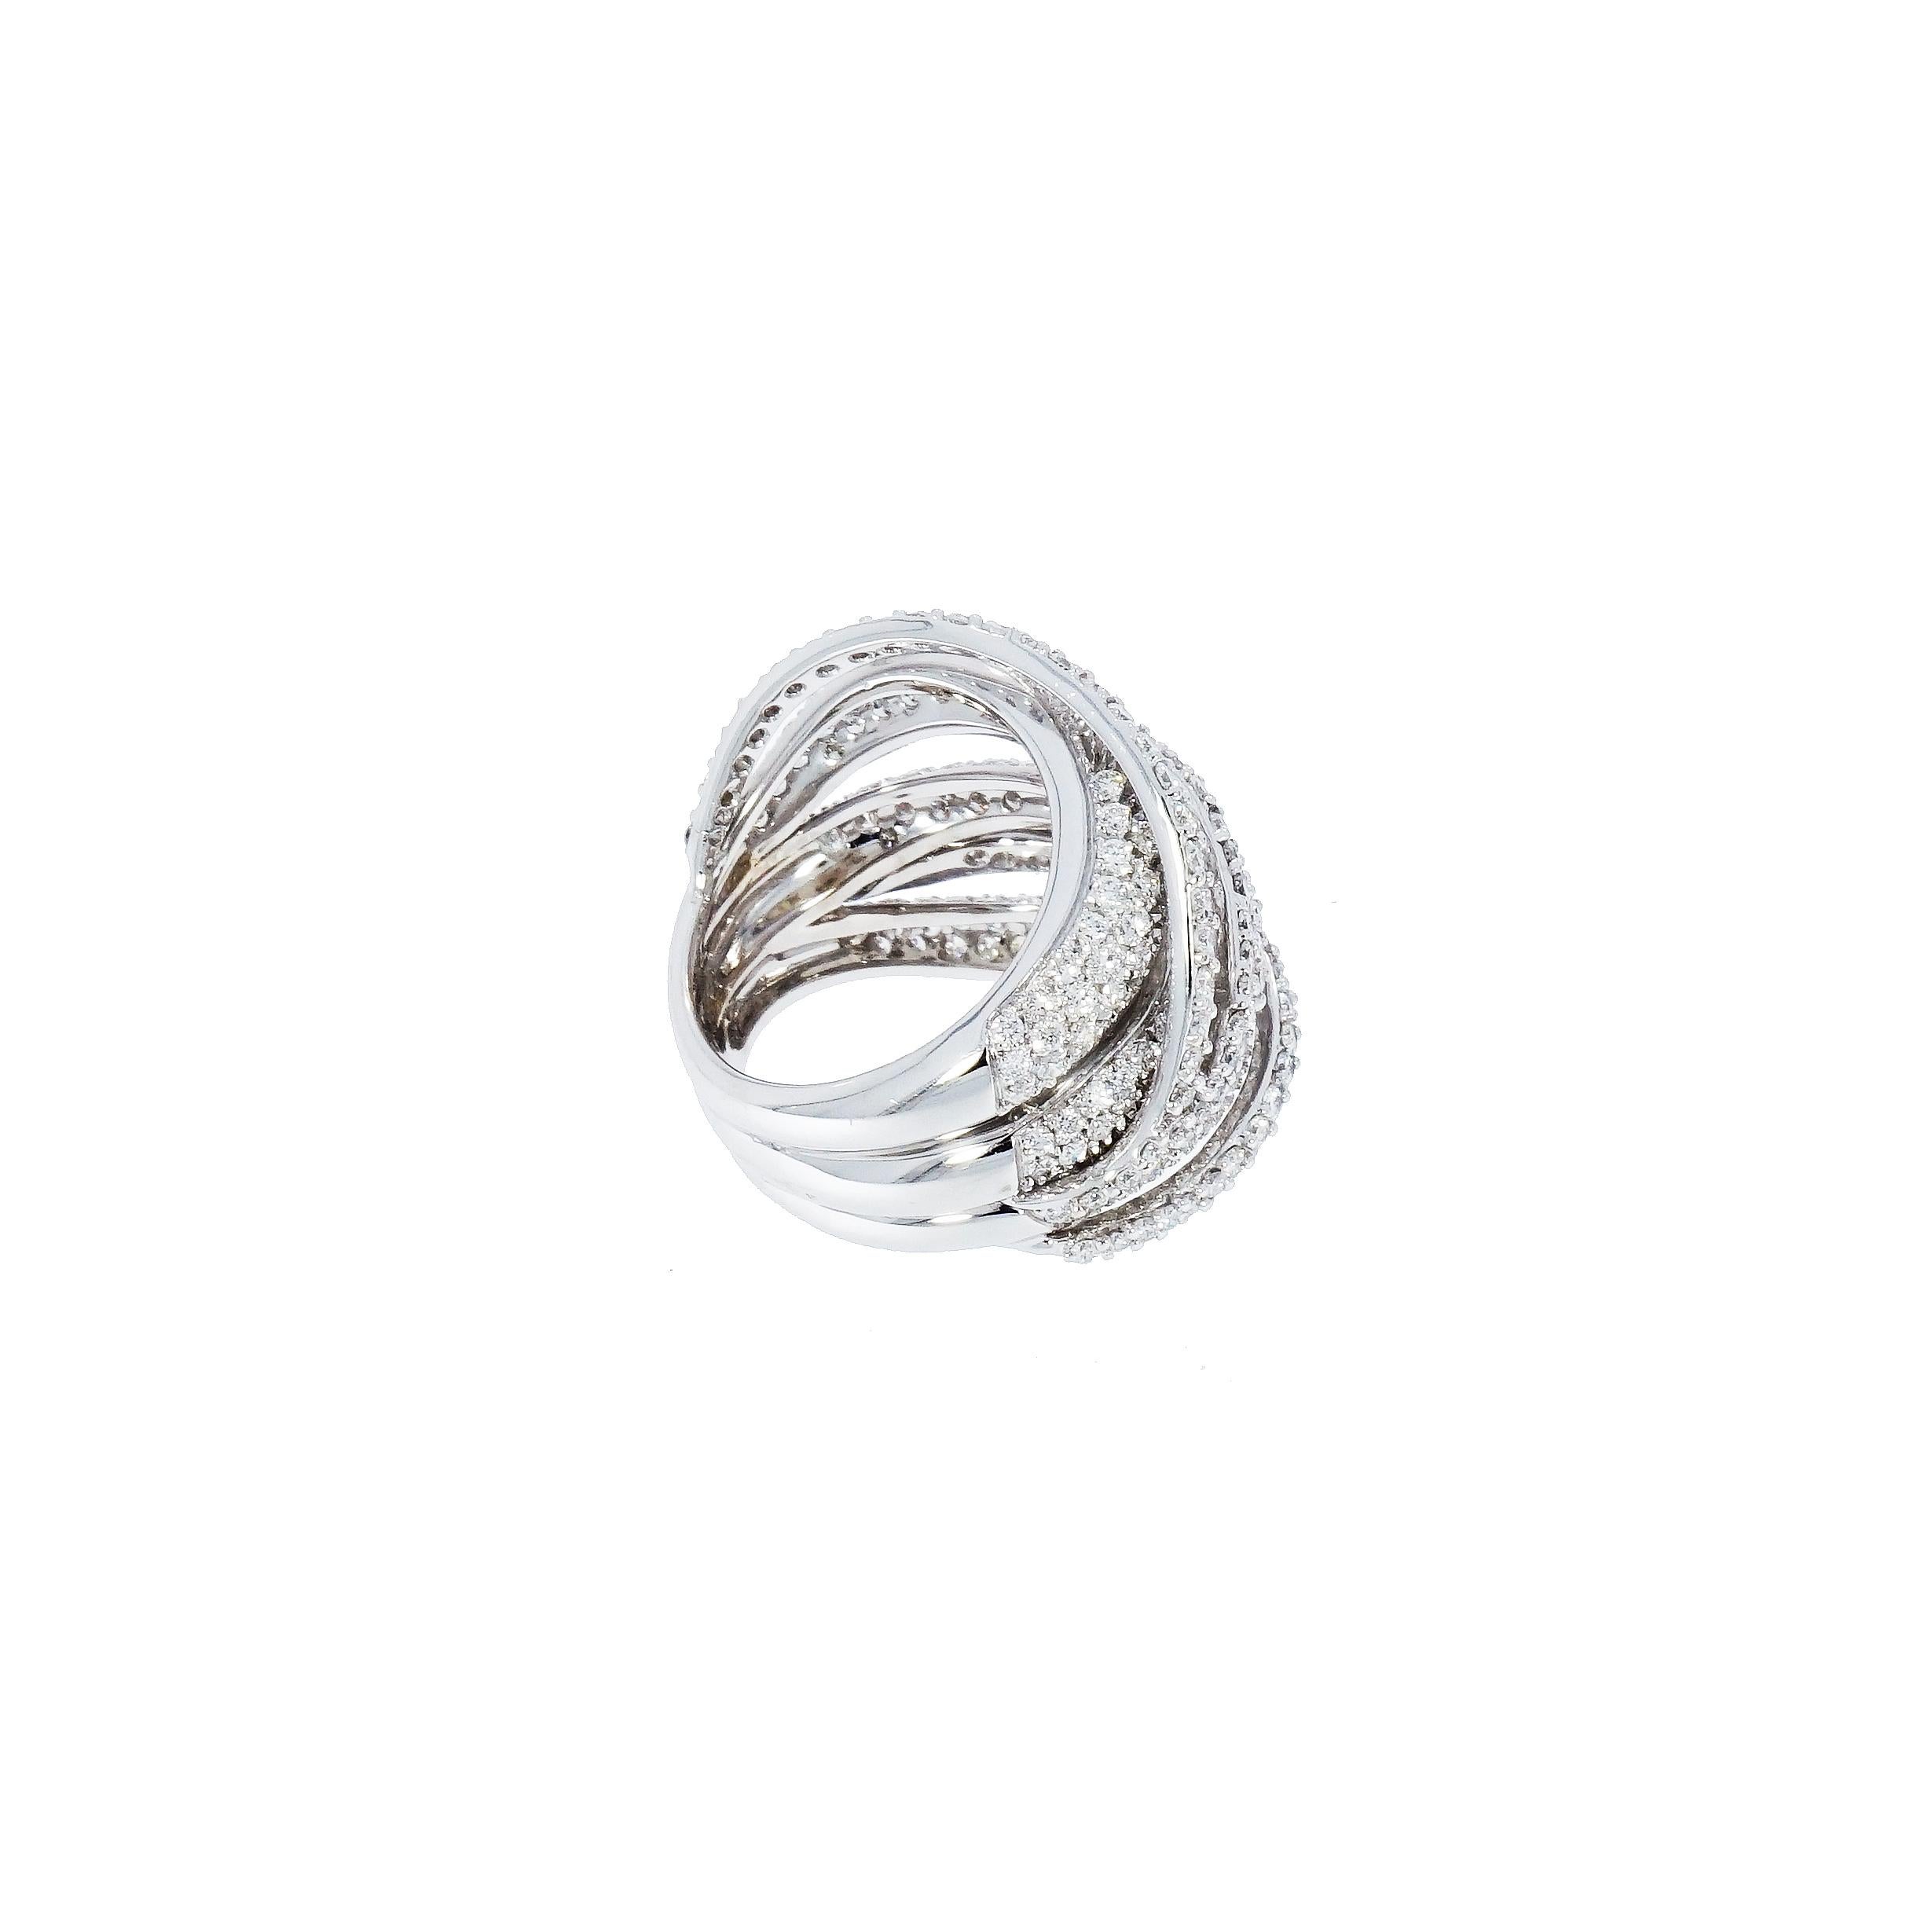 Created with high quality precious diamonds that comes together one by one to enhance beauty in this Multi-layered Diamond Pave White Gold Domed Cocktail Ring.
Inspired by the shapes of nature, in their precious liveries and geometric textures with